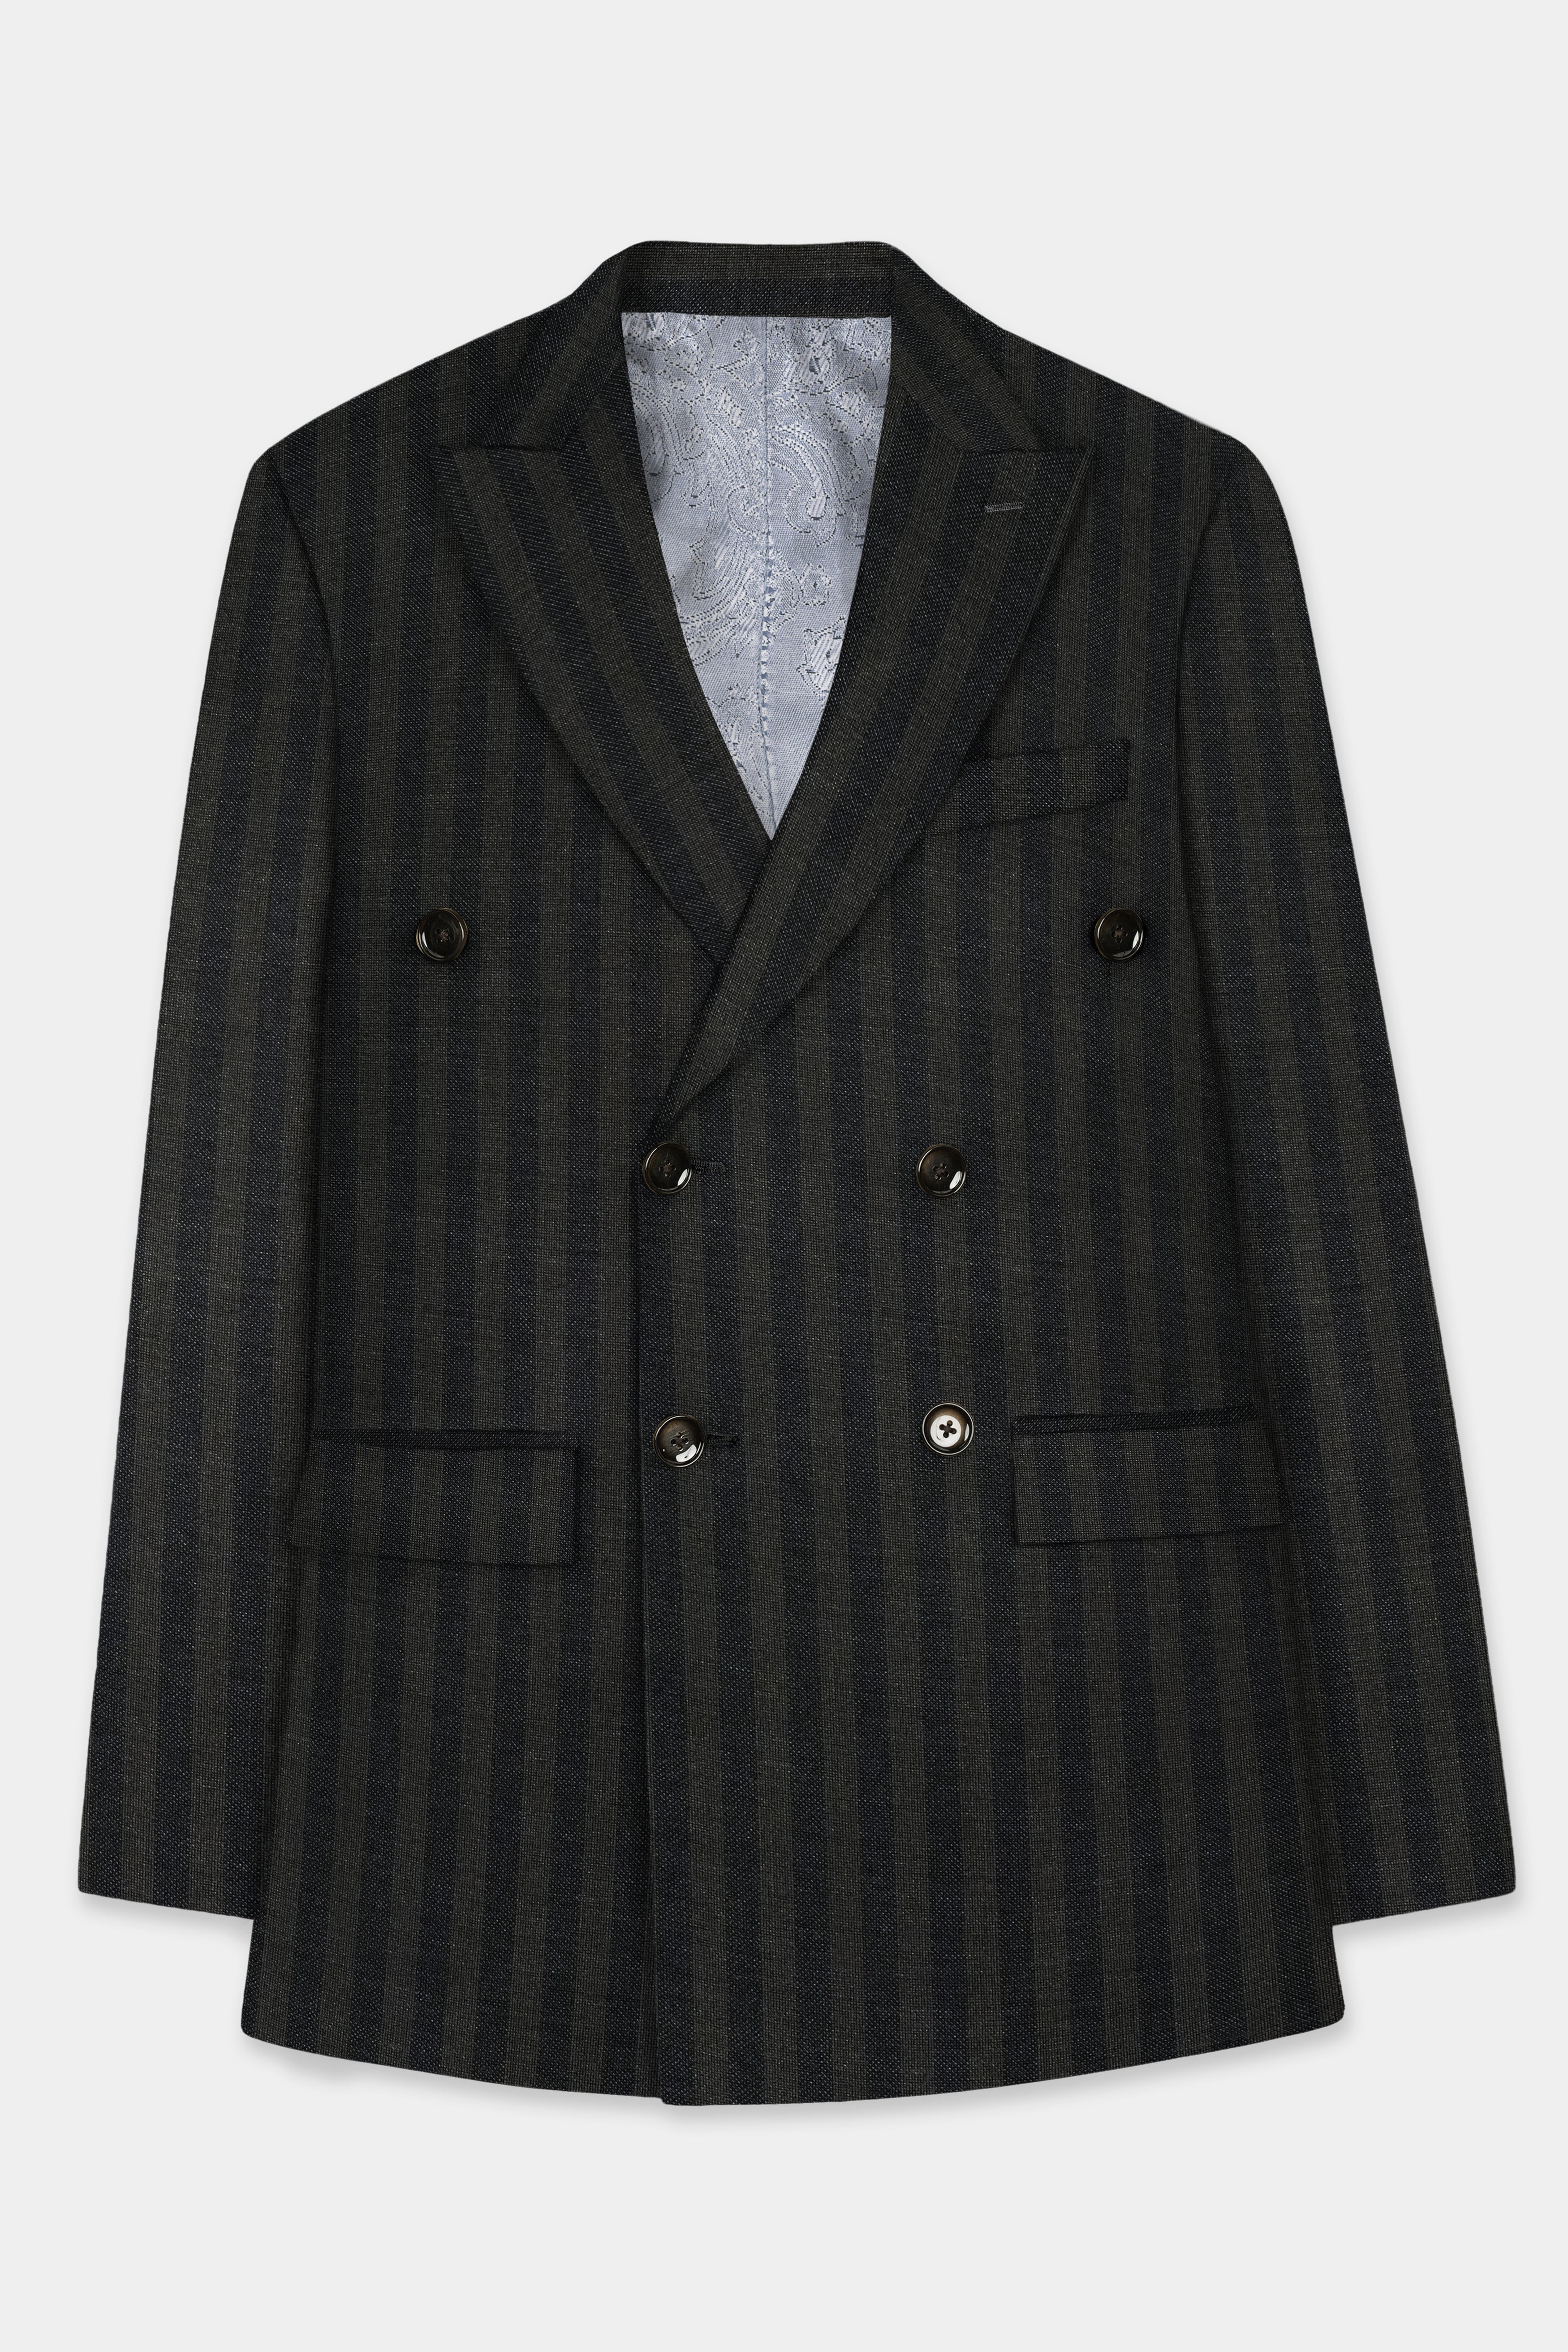 Heavy Green with Black Striped Wool Blend Double Breasted Blazer